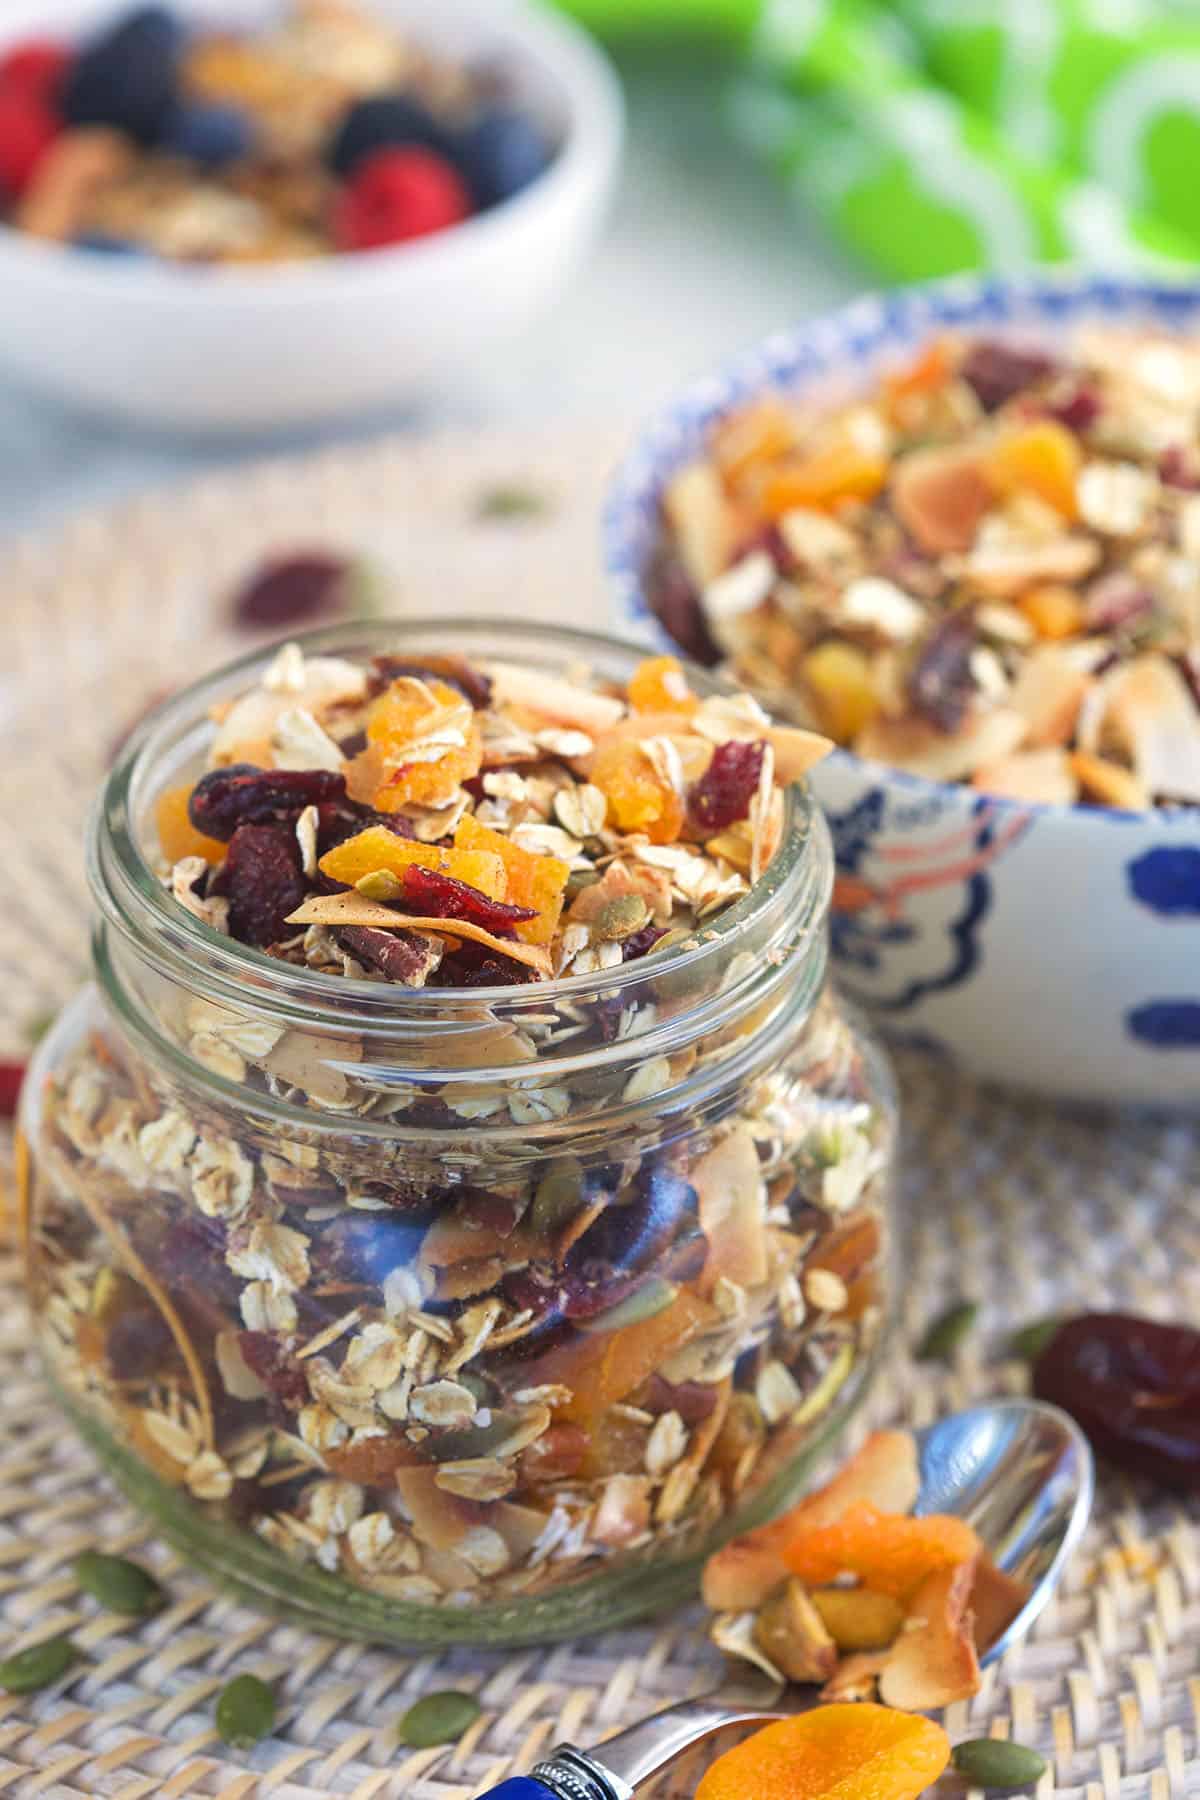 A jar of Muesli is placed on a place mat.